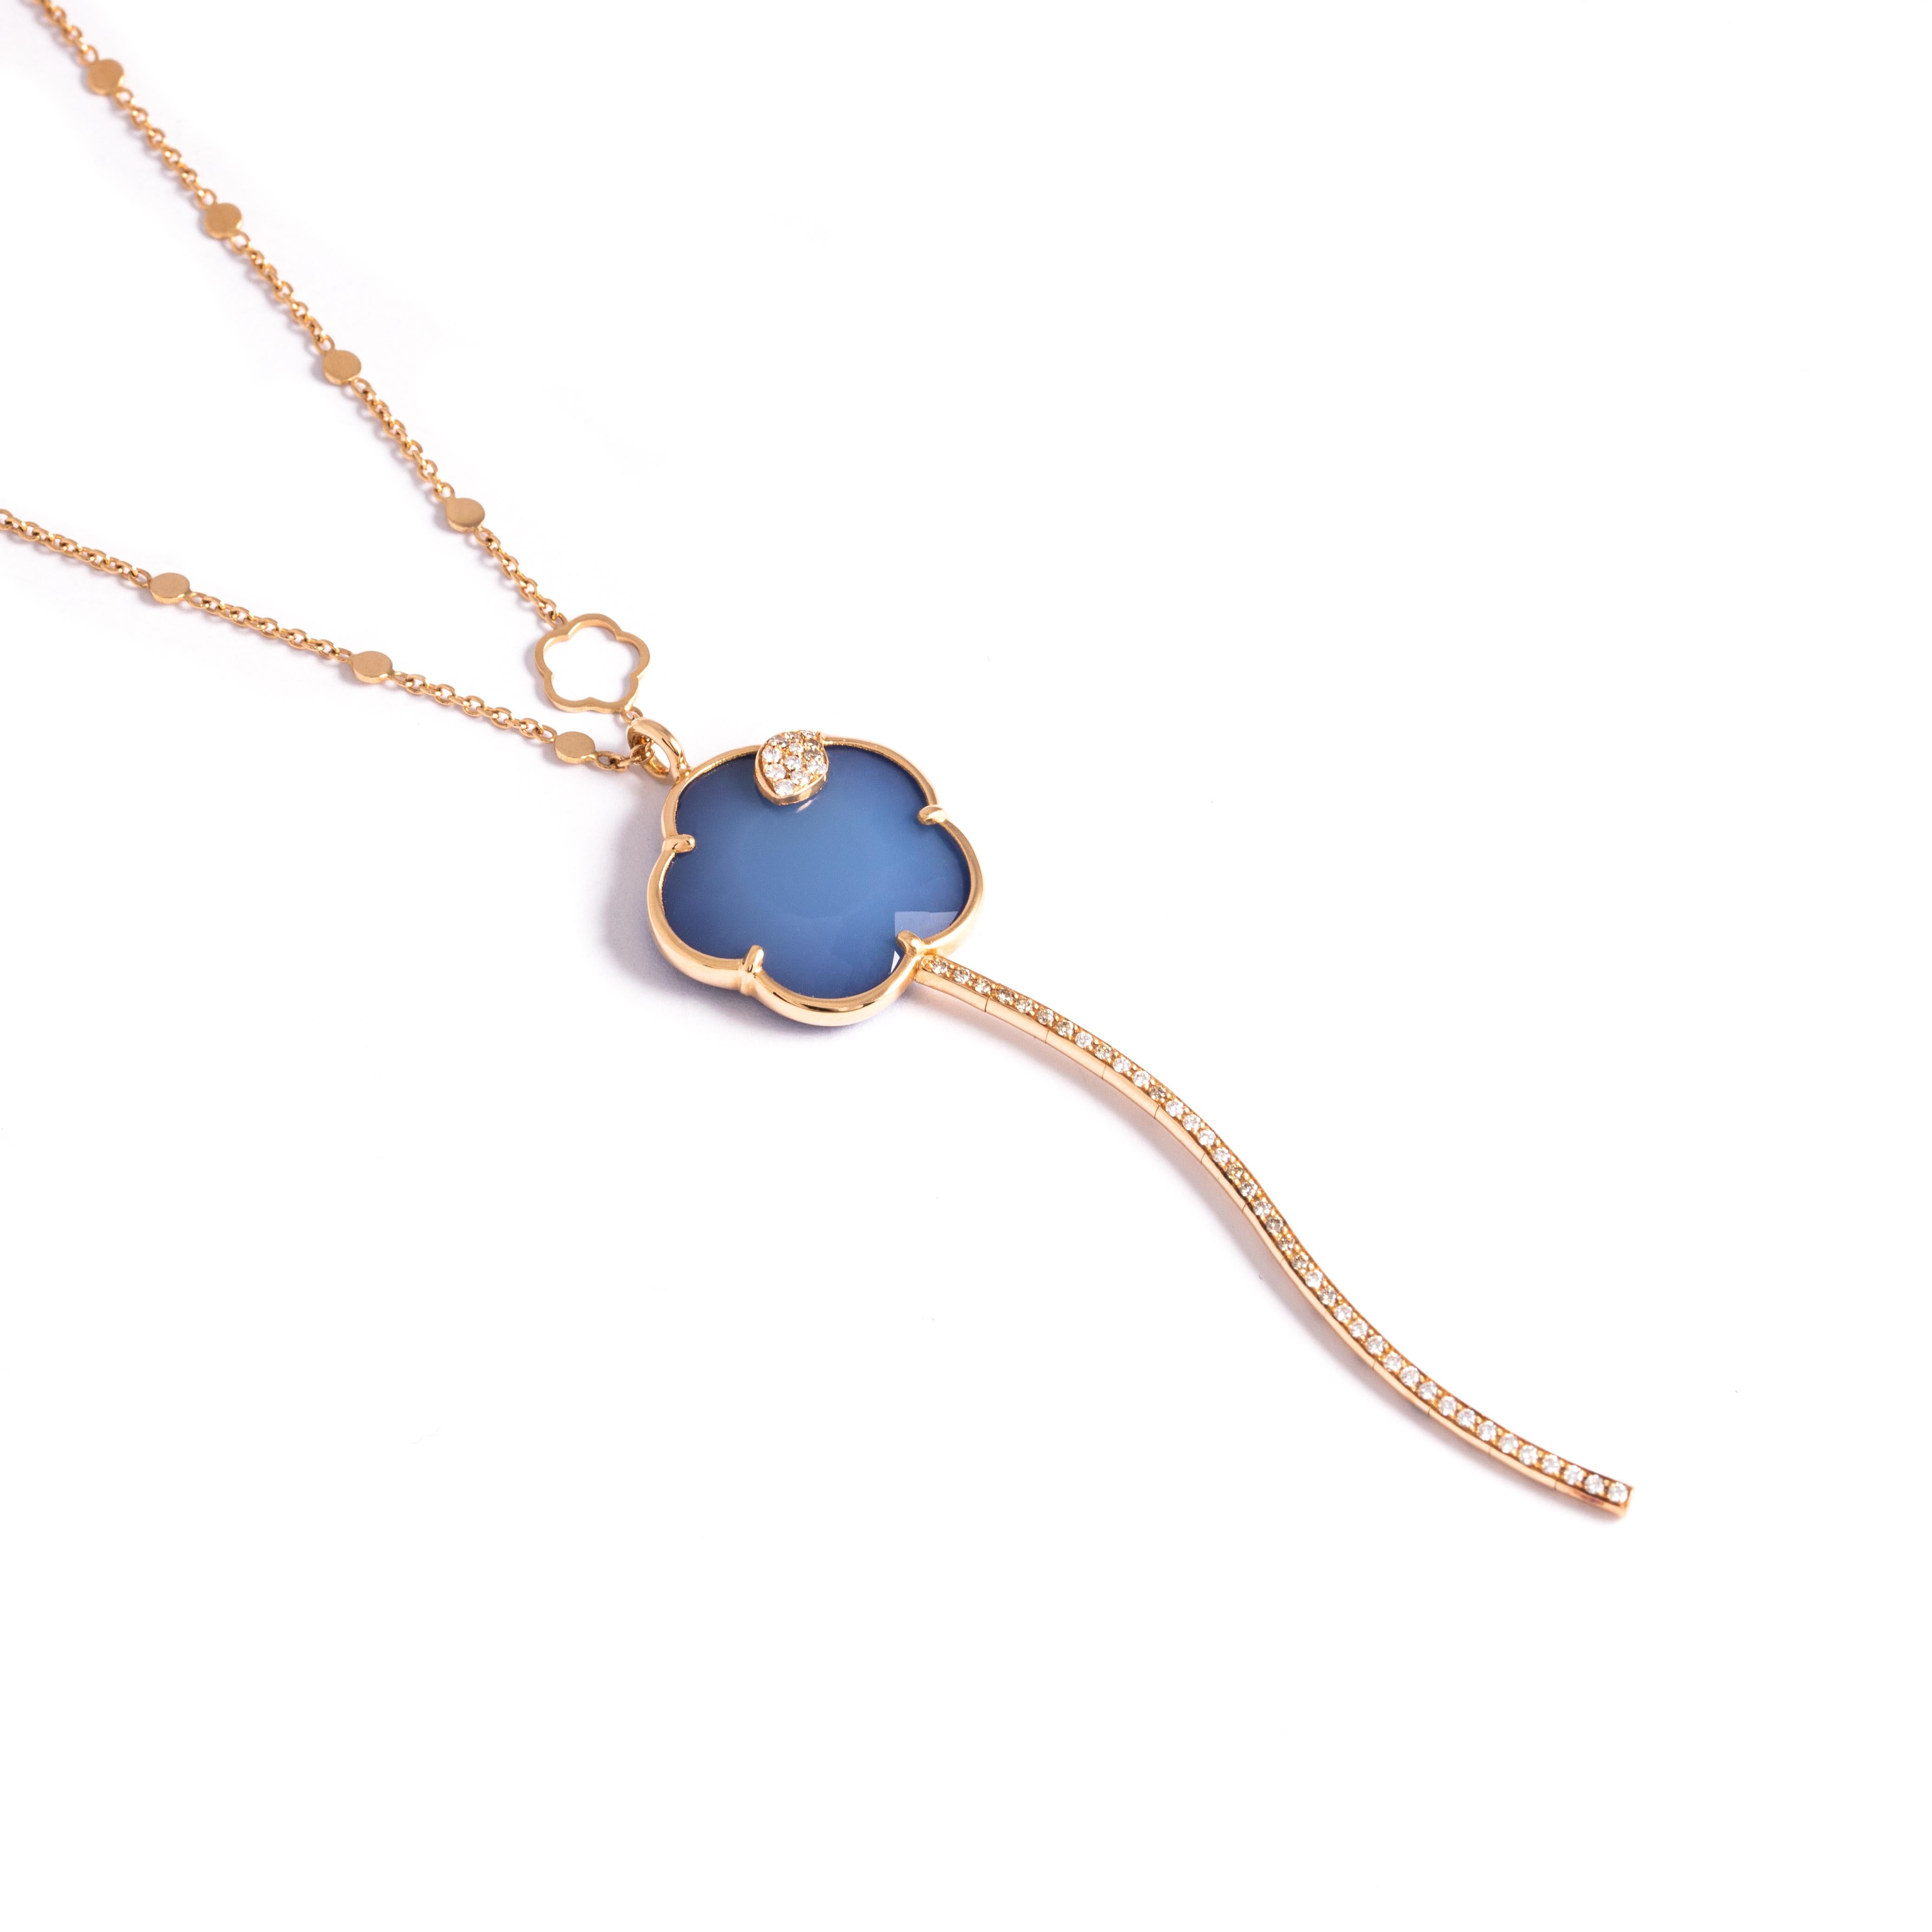 Necklace 18K Gold by Pasquale Bruni
Number: 15967R
Carat: A. 0.34 / Sm. 9,55

Total weight: 12.60 grams.
Length: Maximum 52.00 centimeters (adjustable).
Length: pendant: 8.00 centimeters.
Width pendant: 0.20 centimeters up to 2.00 centimeters.
